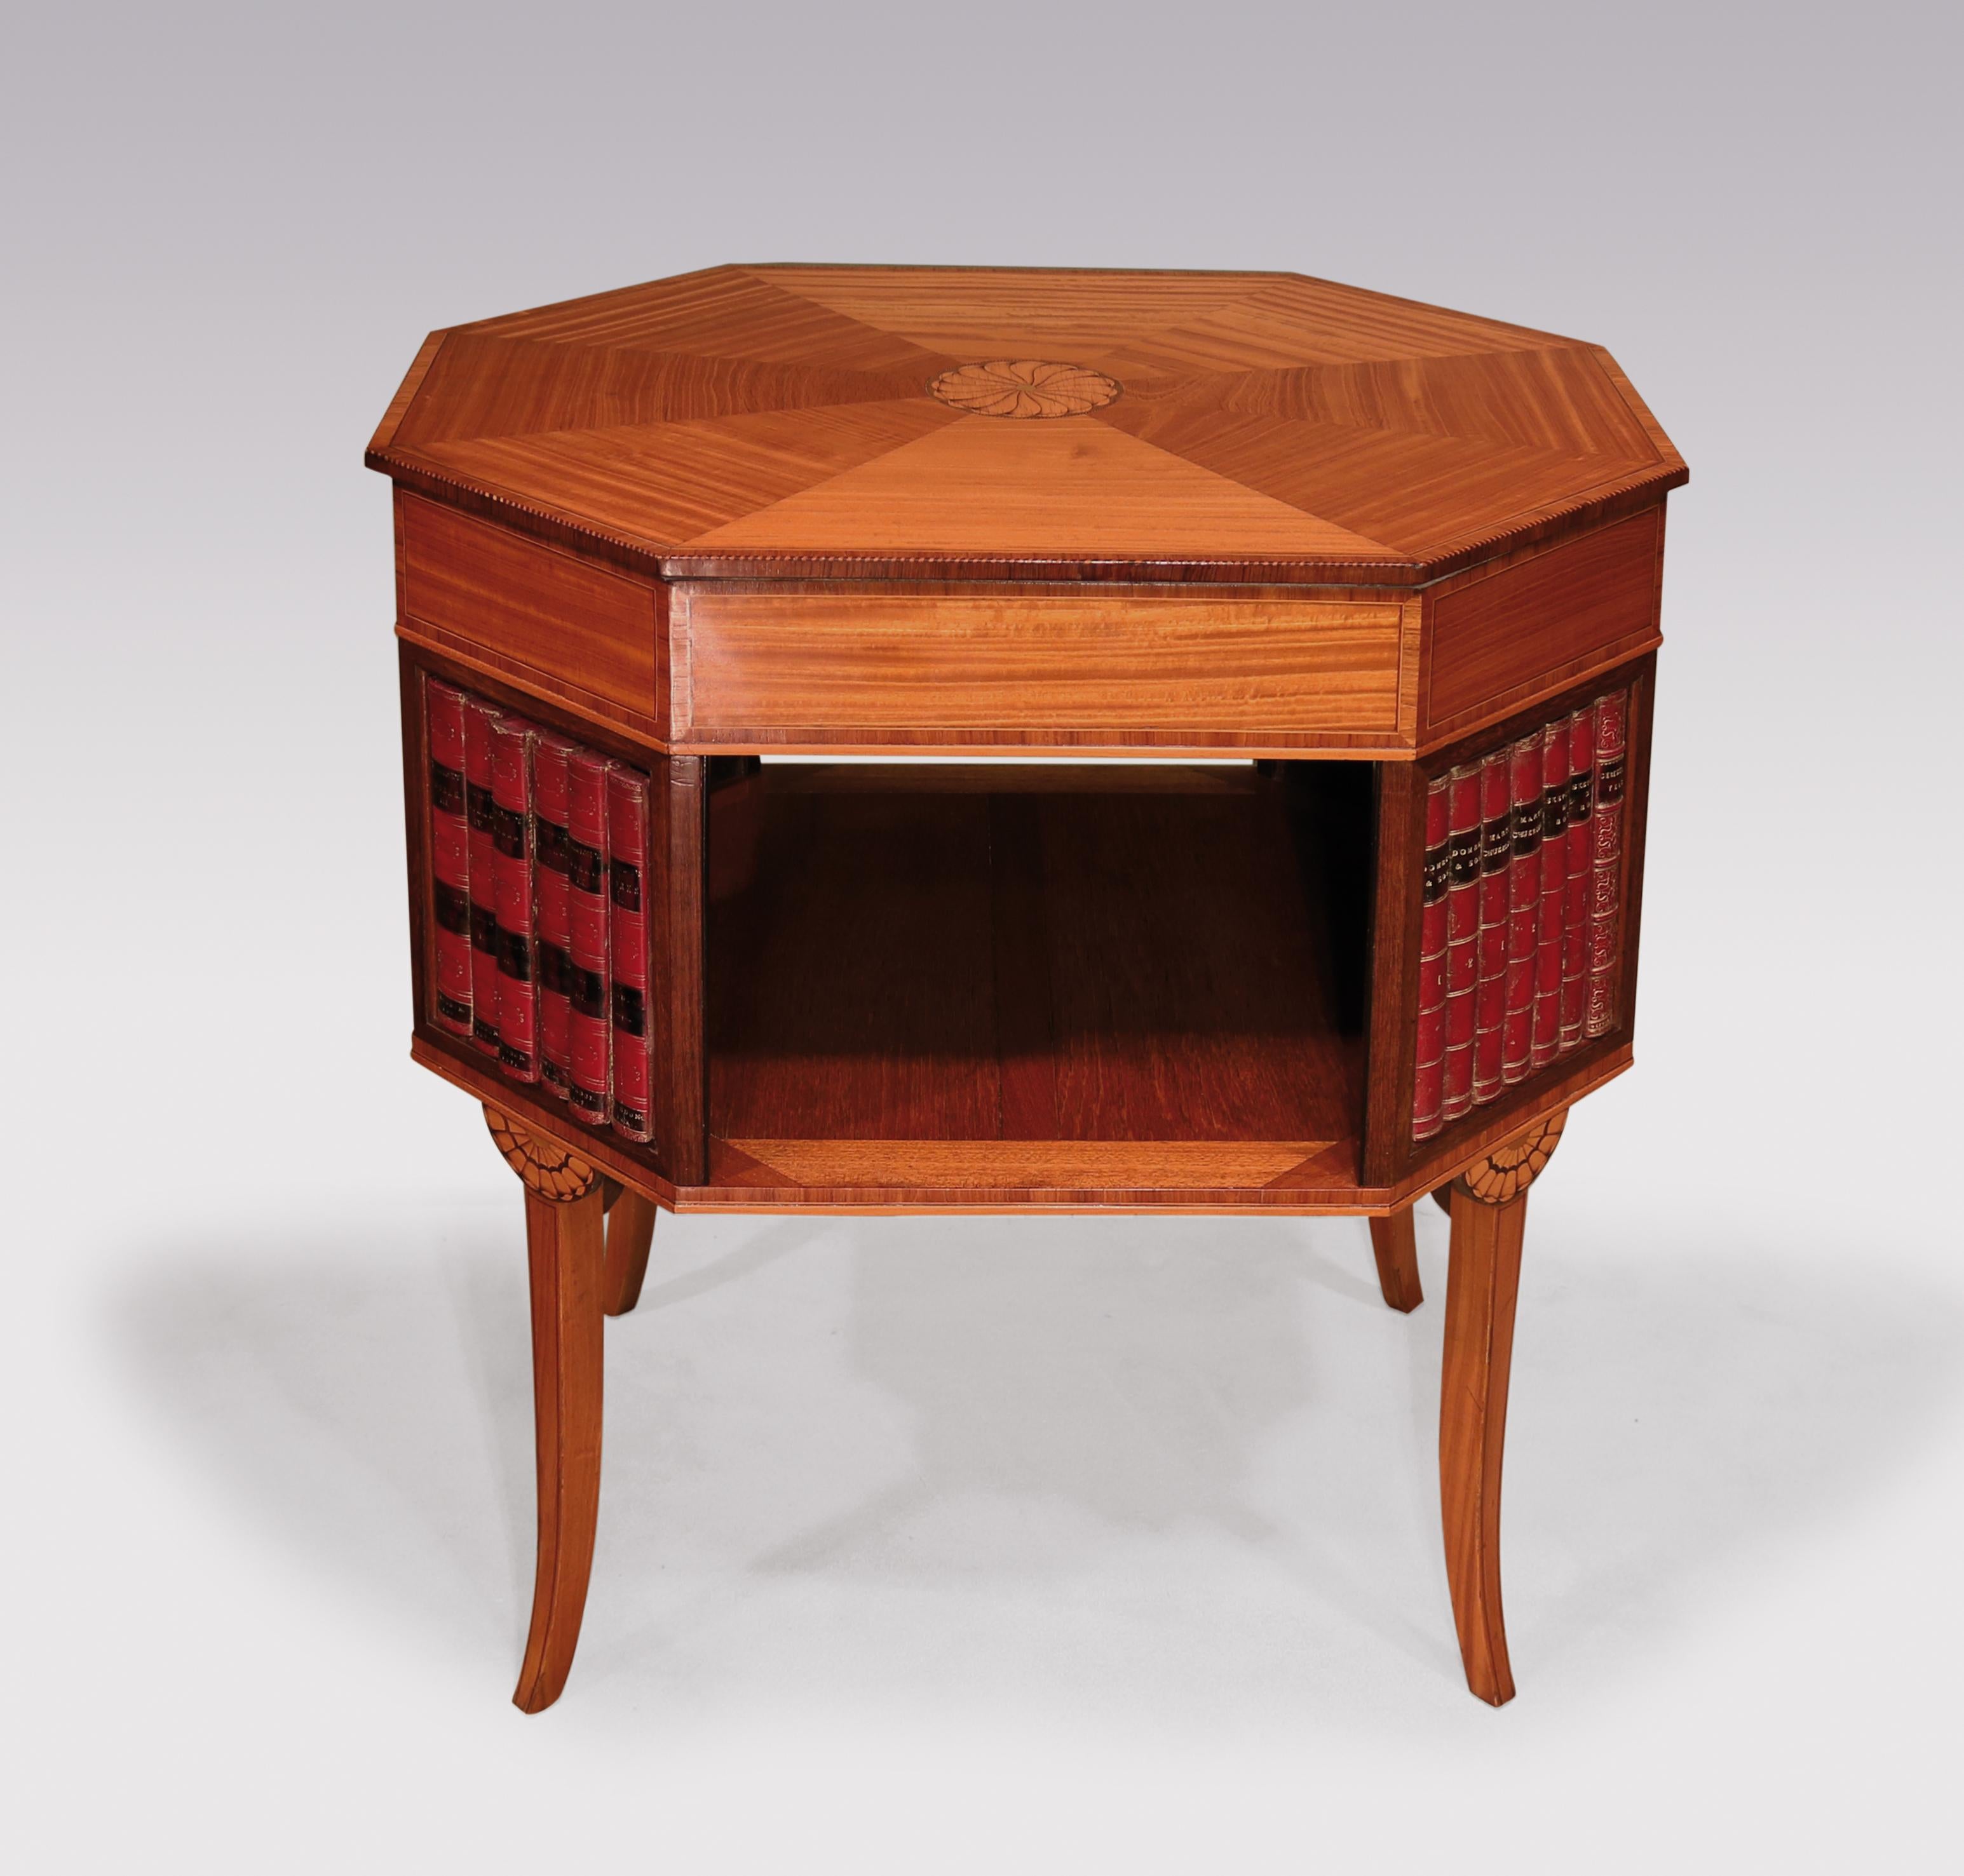 An unusual late 18th century Sheraton period satinwood occasional table having chequered strung tulipwood banded octagonal segmented top centred with scalloped roundel panel, above frieze with concealed cedar lined drawer. The piece, with open shelf